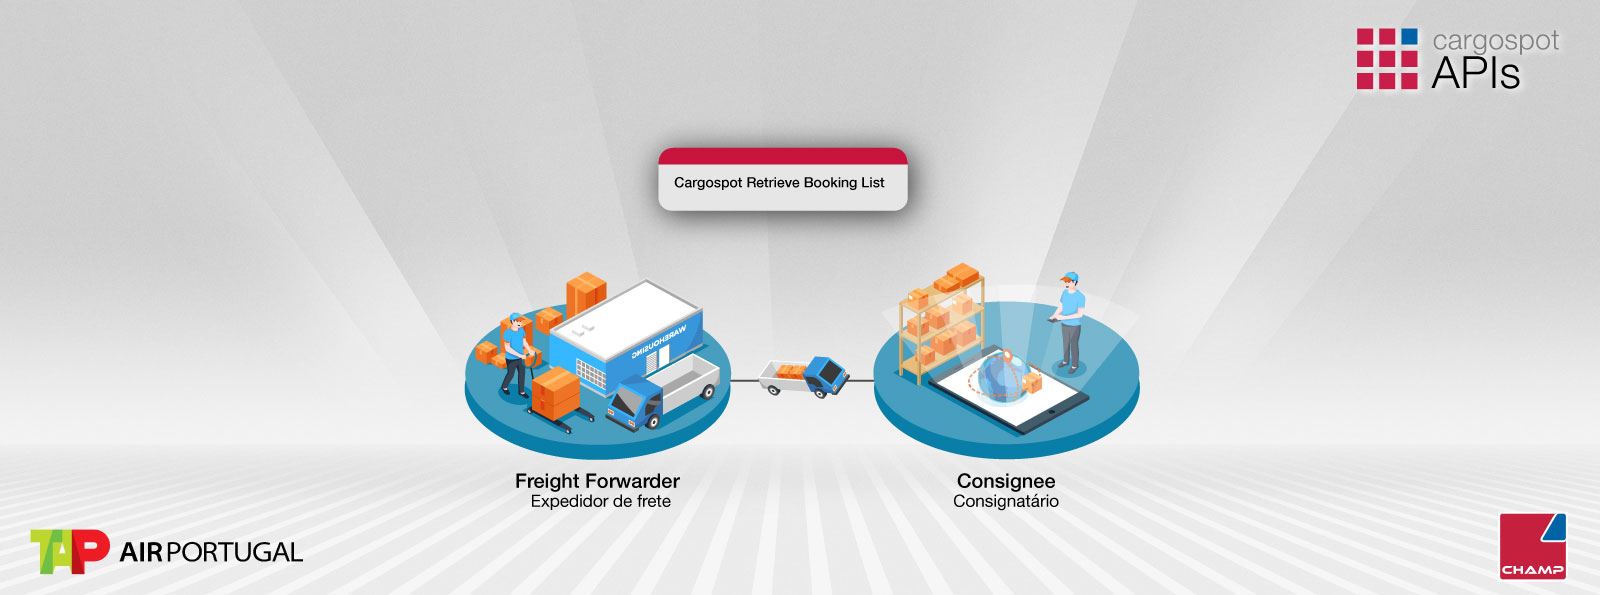 The background and logos remain as in the first image in the gallery. In the center, highlighted, it presents a rectangle with the API Cargospot Retrieve Booking List and two illustrations. In the first illustration (captioned with “Freight Forwarder”) you can see a man carrying boxes, side by side to a warehouse and a truck. The second illustration (captioned with “Consignee”) shows a man holding a remote, in front of a huge screen with the image of parcels circulating around the world.